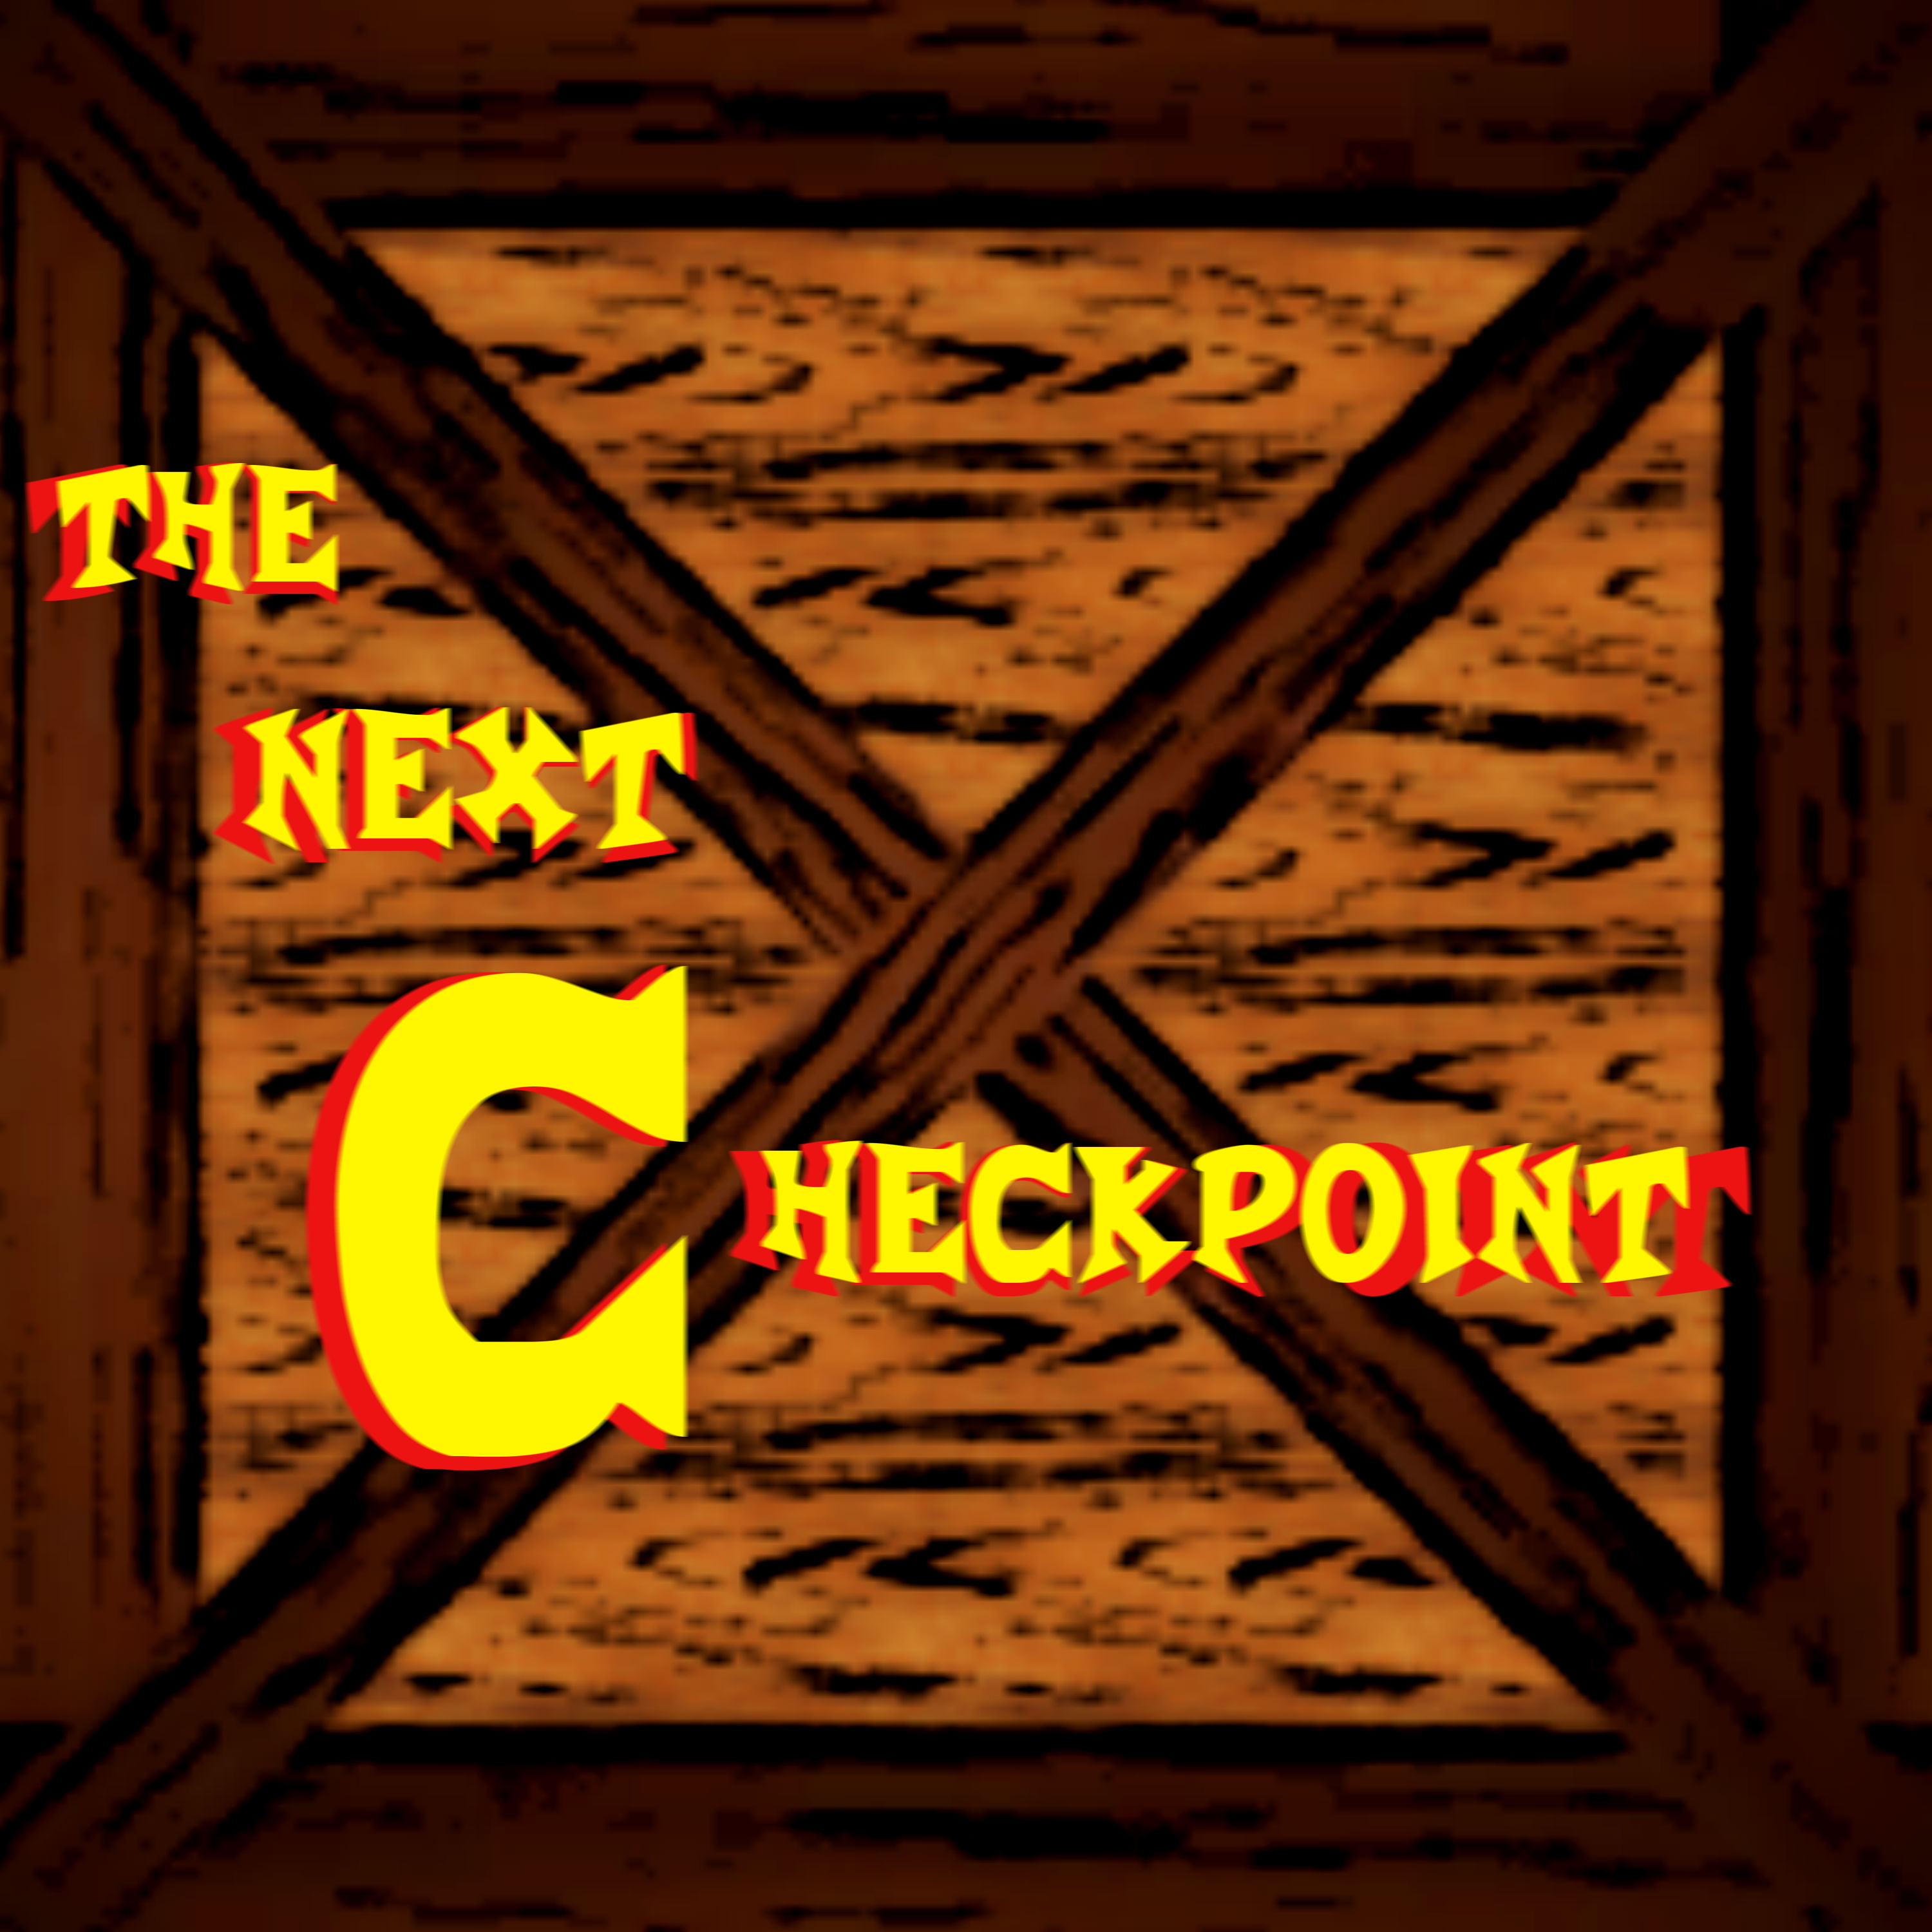 The Next Checkpoint